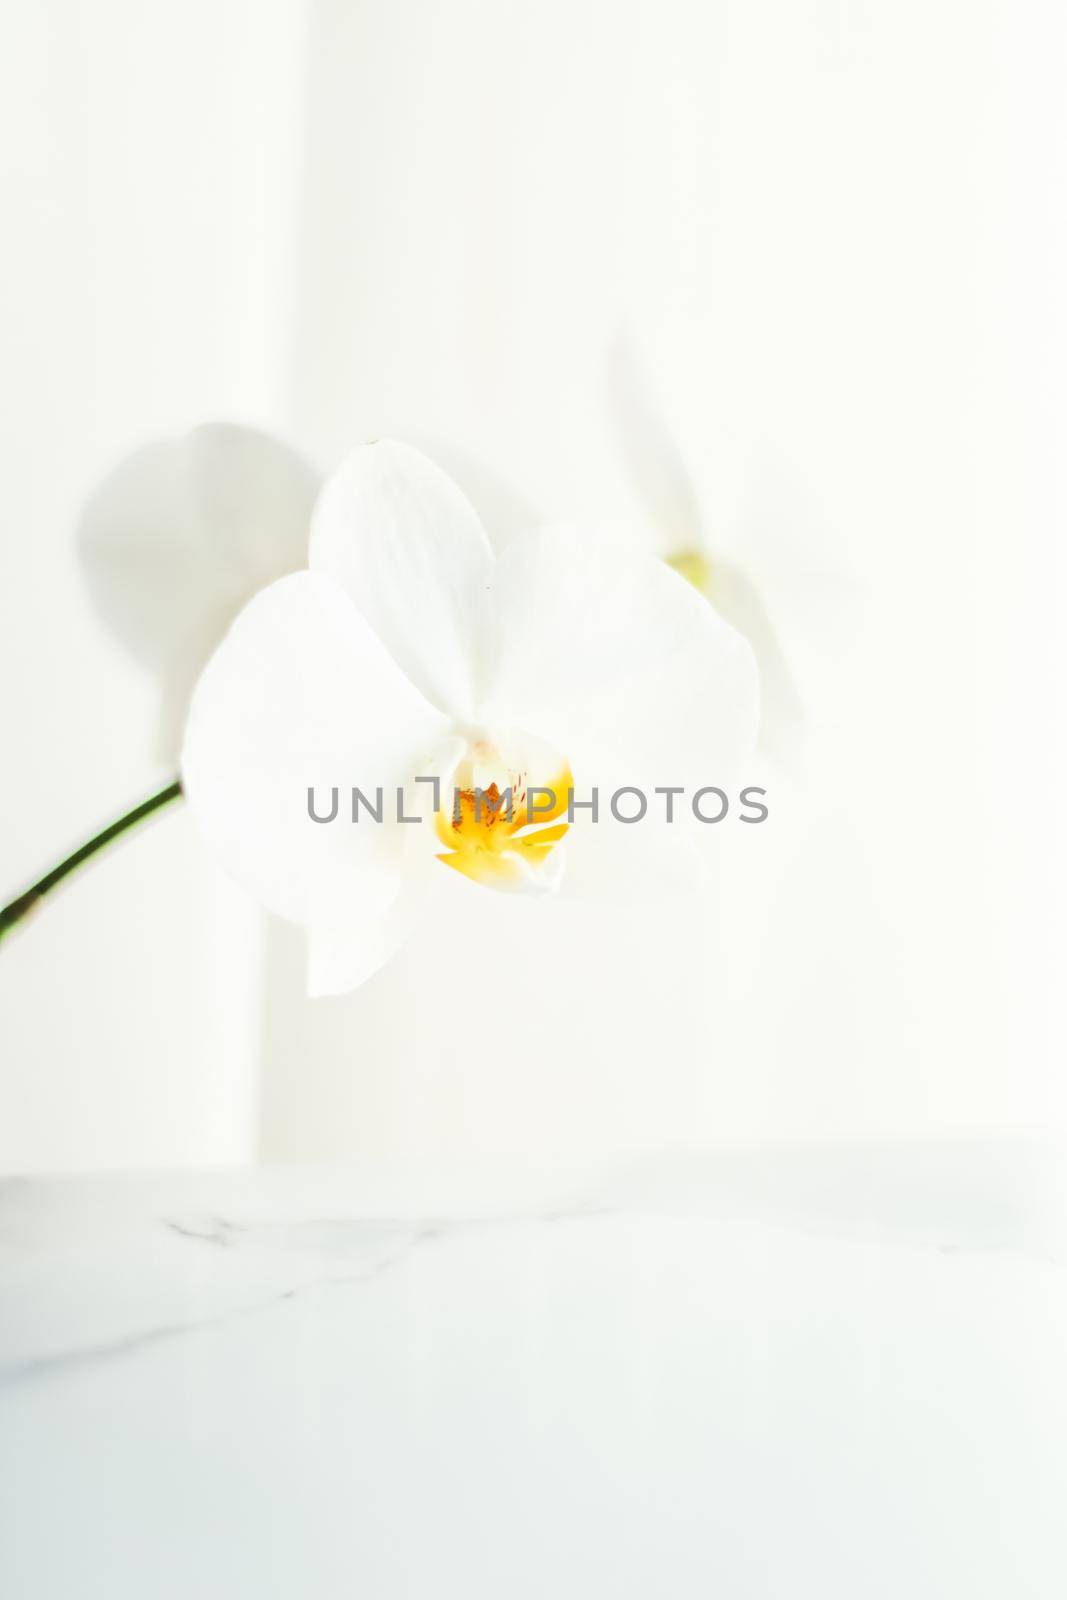 White orchid flower in bloom, abstract floral blossom art background and flowers in nature for wedding invitation and luxury beauty brand holiday design by Anneleven